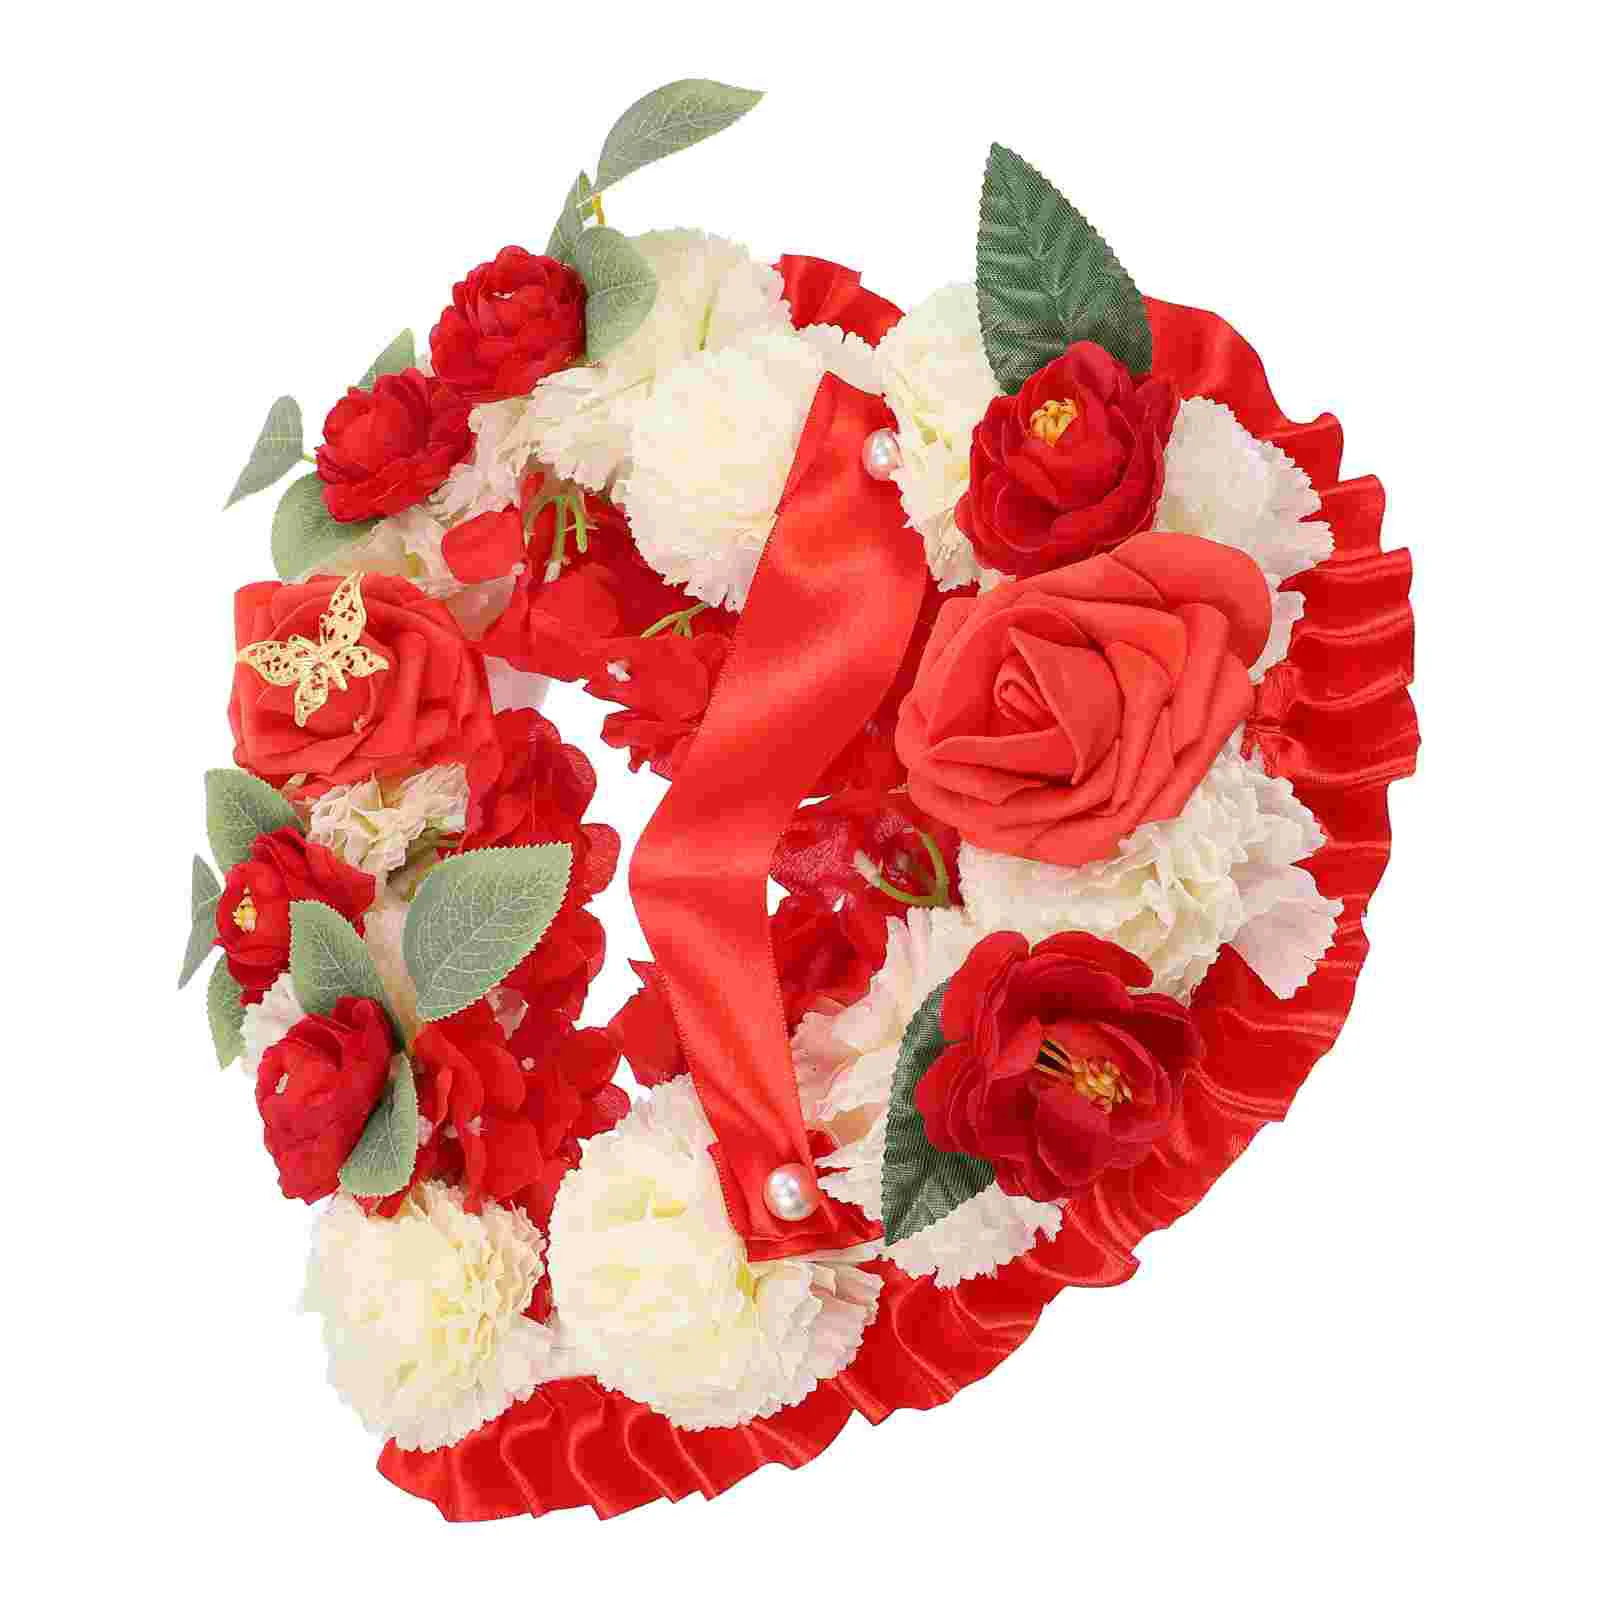 

Artificial Heart Memorial Wreath Floral Decor Tribute Polyester Funeral Fake Garland Grave decorations outdoor cemetery